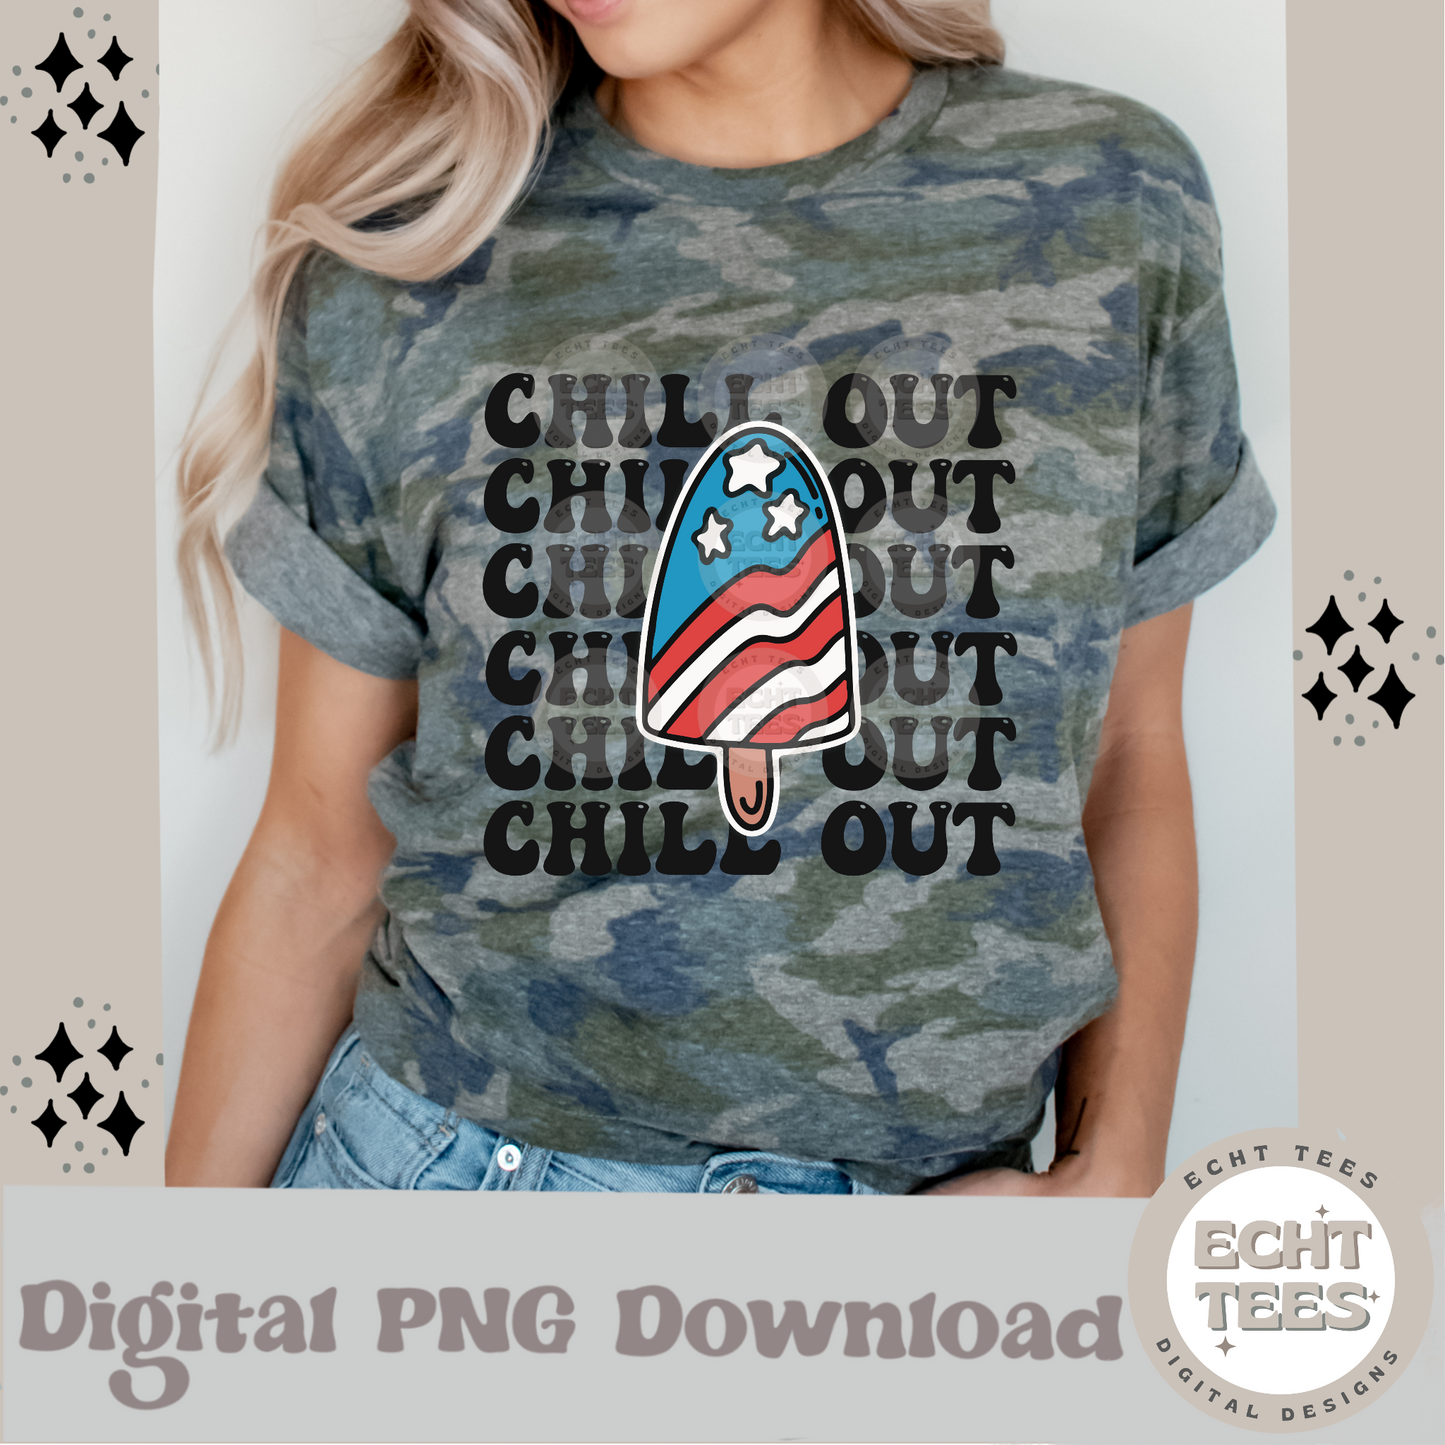 Chill out PNG Digital Download